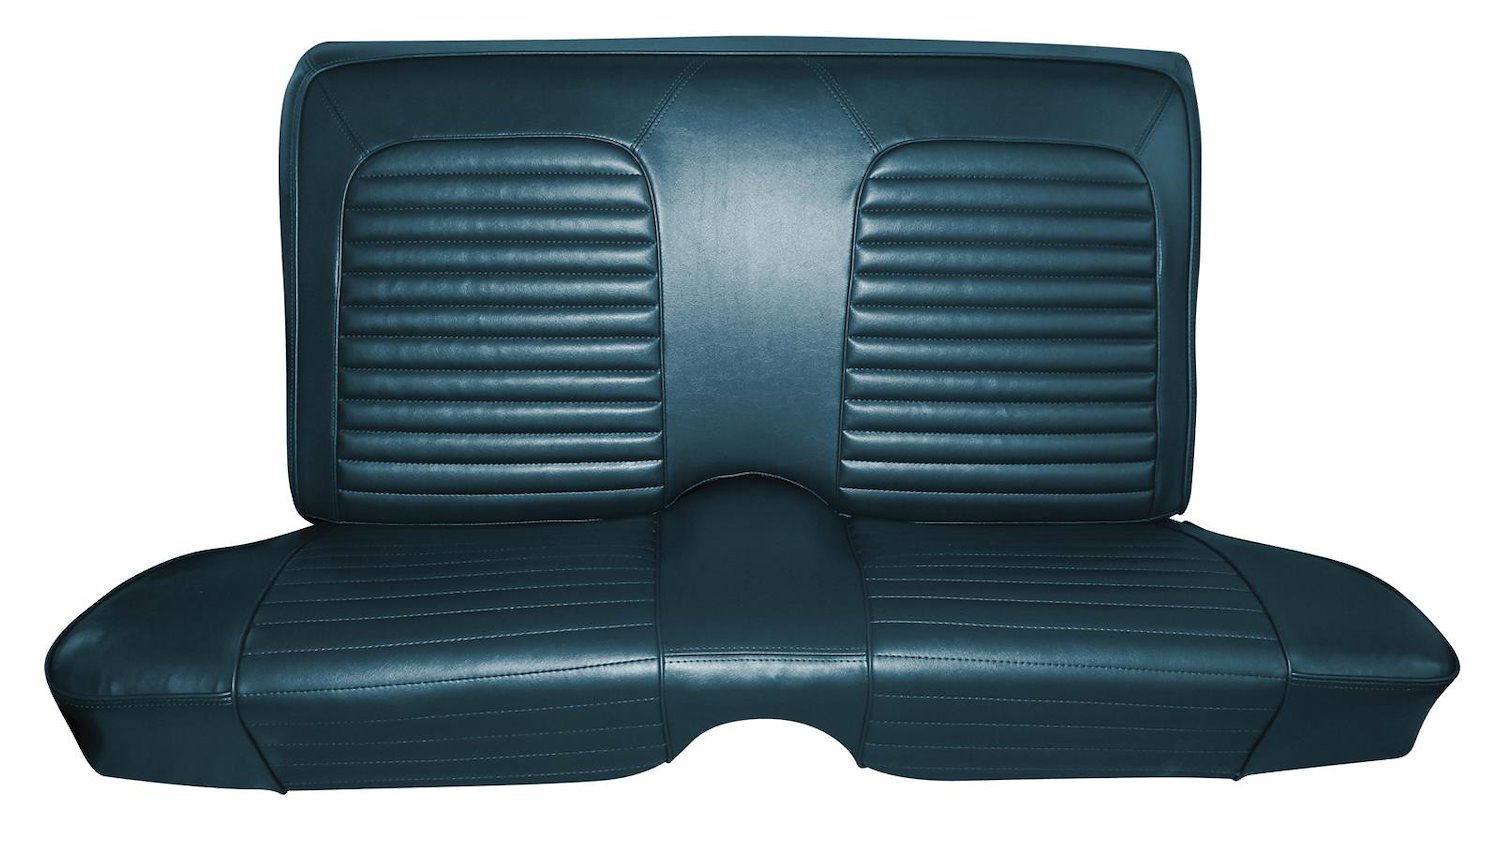 1966 Chevrolet Chevelle Malibu and Super Sport Convertible Interior Rear Bench Seat Upholstery Set